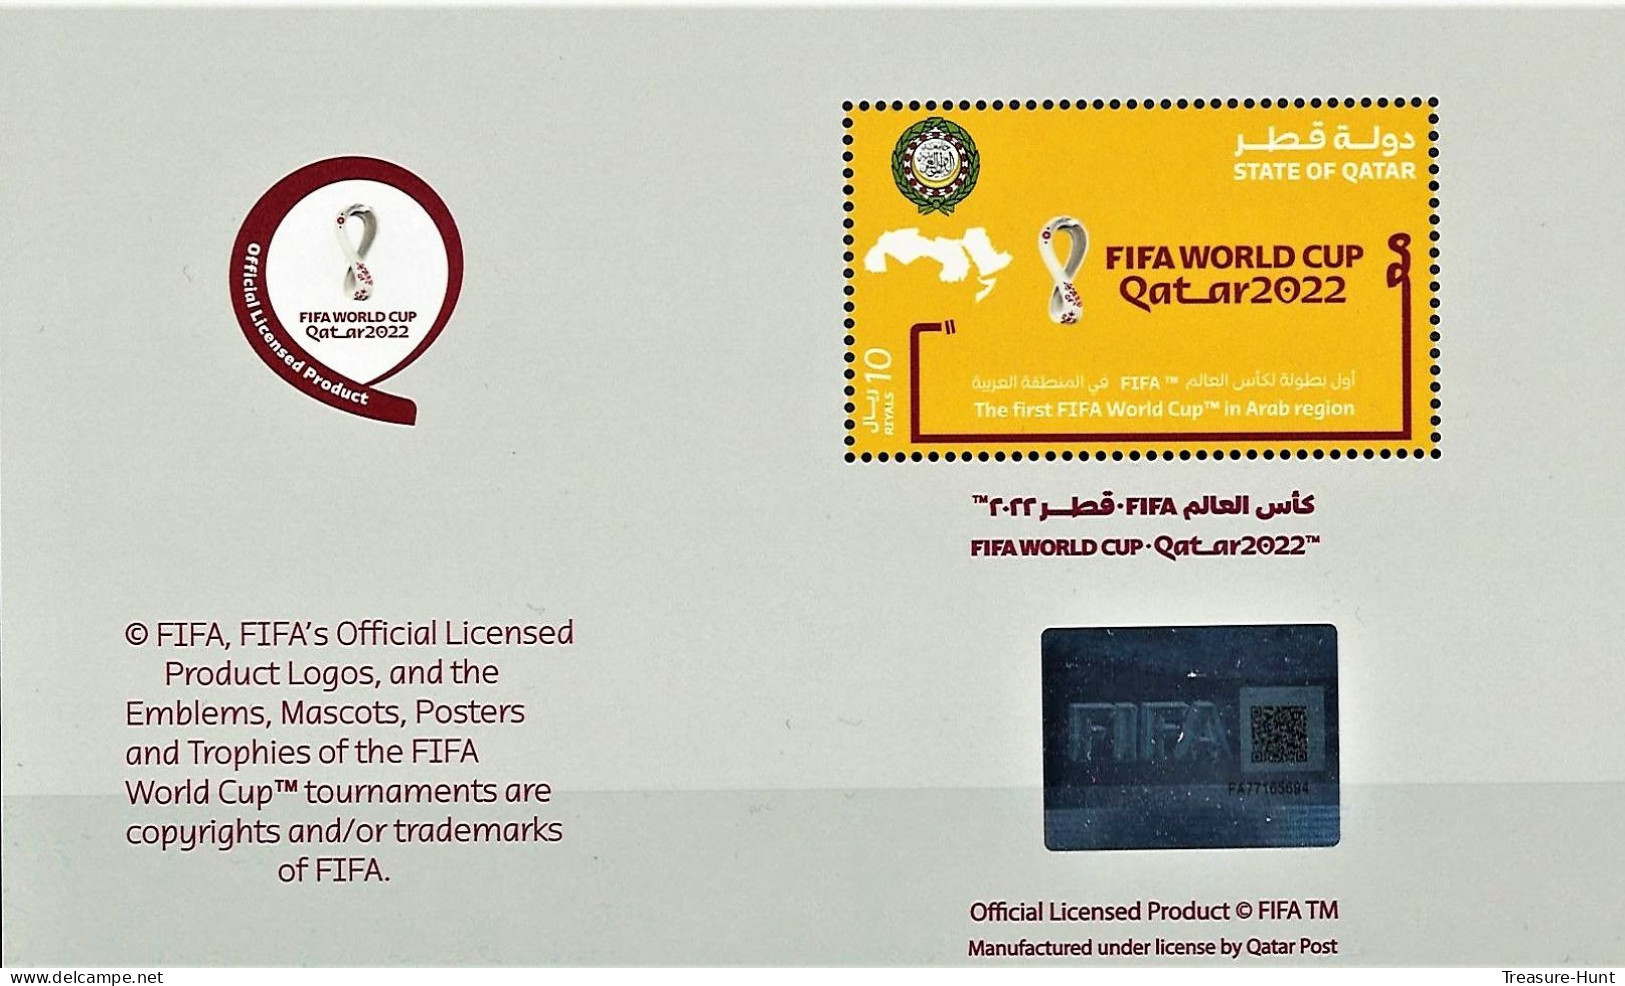 Hologram Holograms QR Code - 2022 FIFA World Cup Soccer - 1st FIFA In Arab World - Joint Issue Stamp Sheet Qatar - Holograms